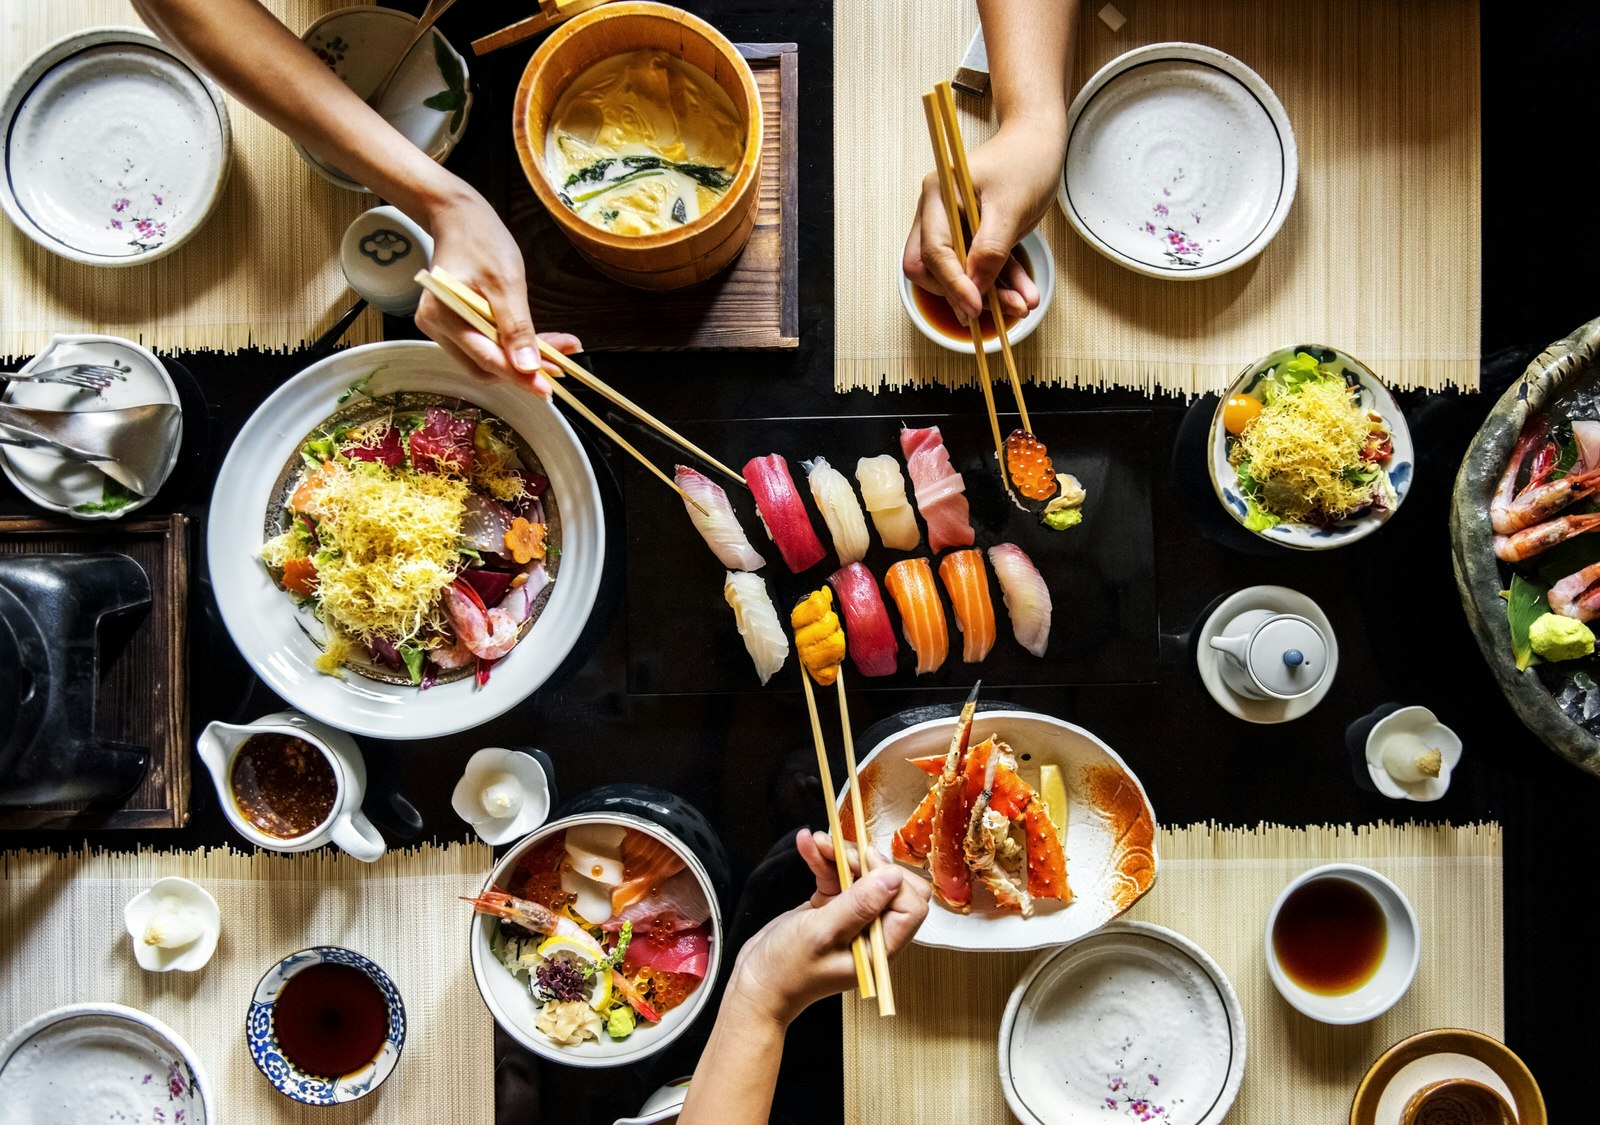 An aerial shot of a table with several sushi dishes laid out. There are three hands holding chopsticks reaching towards the dishes from around the table.